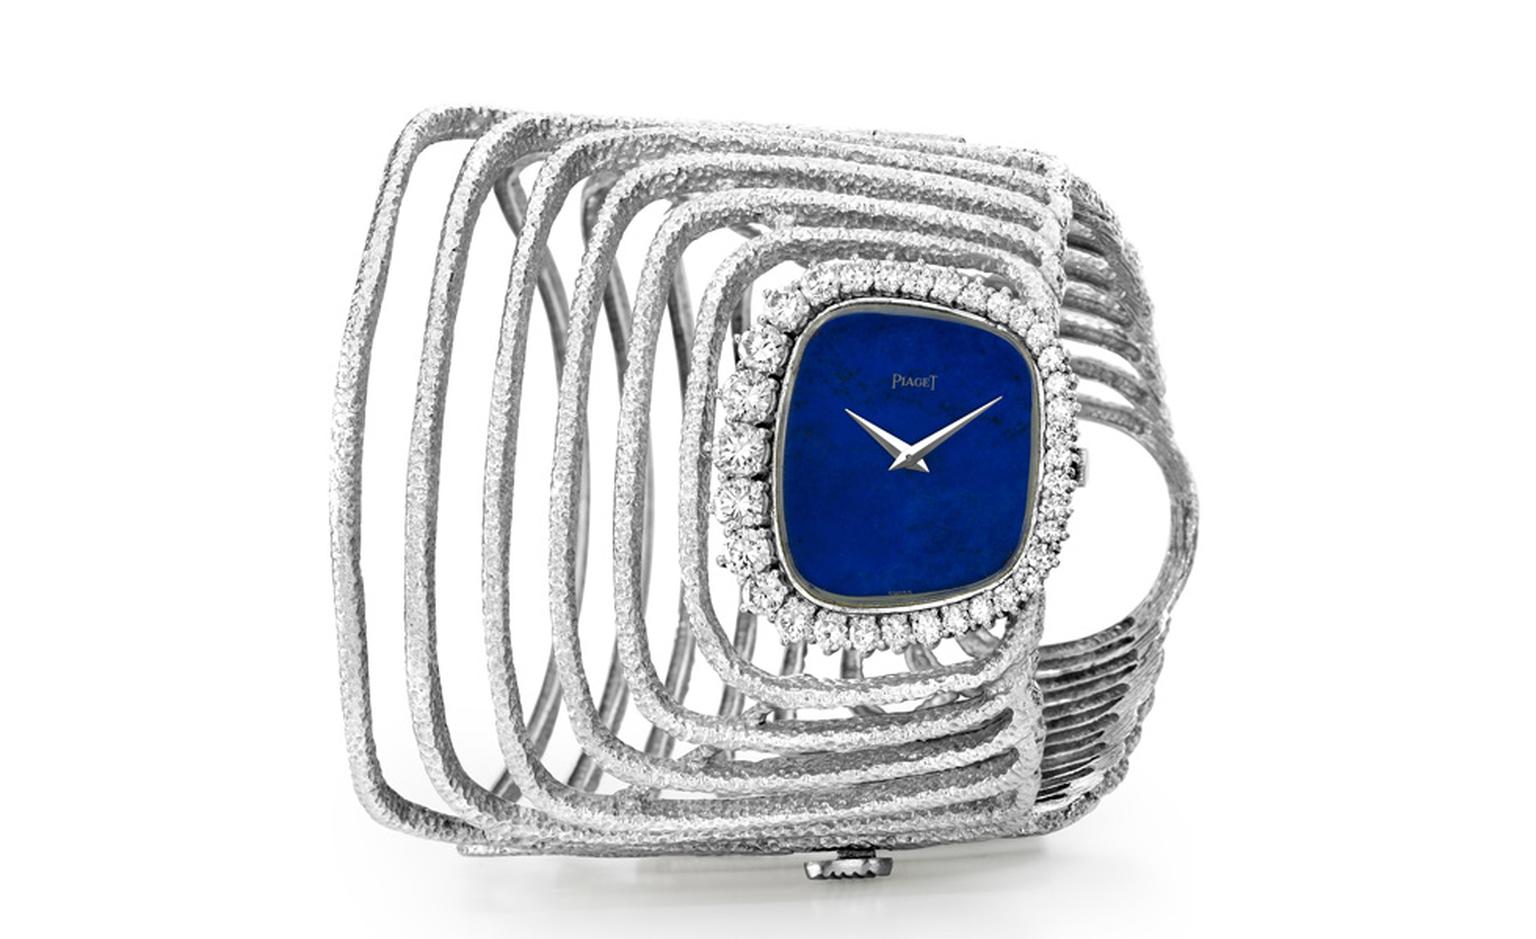 Piaget Cuff 1970 watch in white gold with lapis lazuli dial and bezel set with diamonds.  Piaget ultra-thin hand wound 9P movement. Piaget Private Collection.